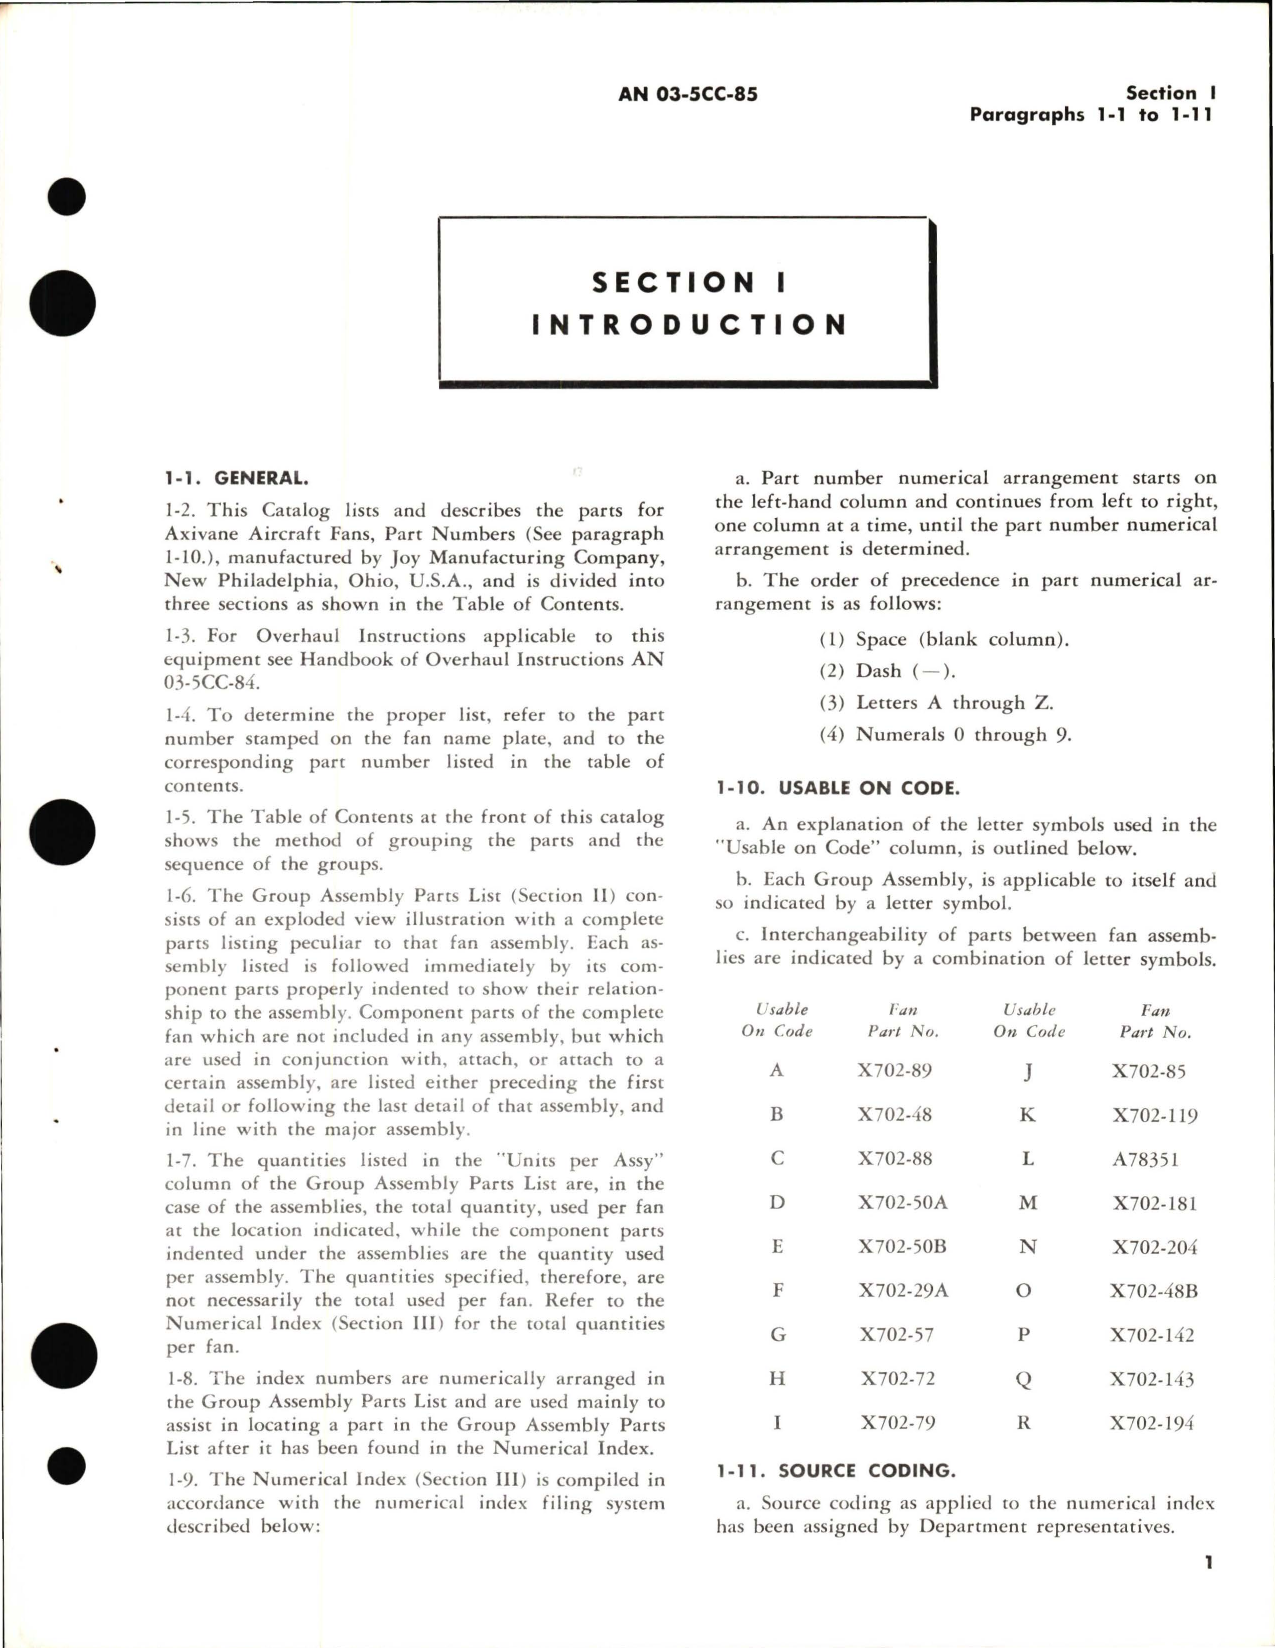 Sample page 5 from AirCorps Library document: Illustrated Parts Breakdown for Axivane Aircraft Fans Part X702 Series 